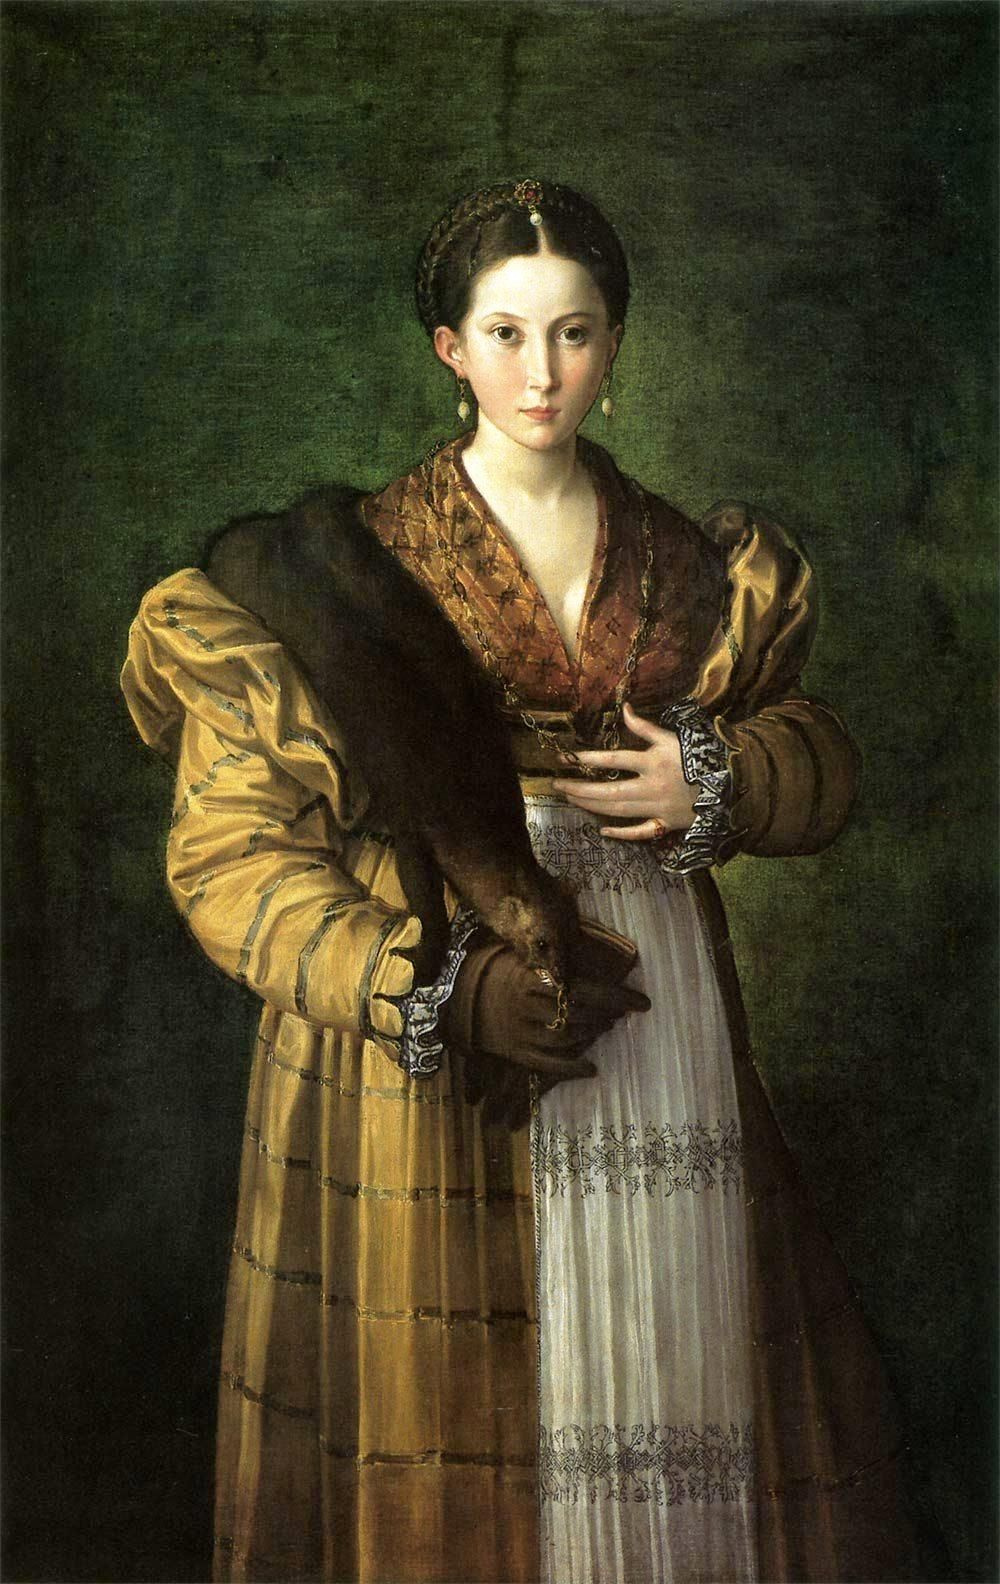 Francesco Parmigianino. Portrait of a young lady, called "Anthea"